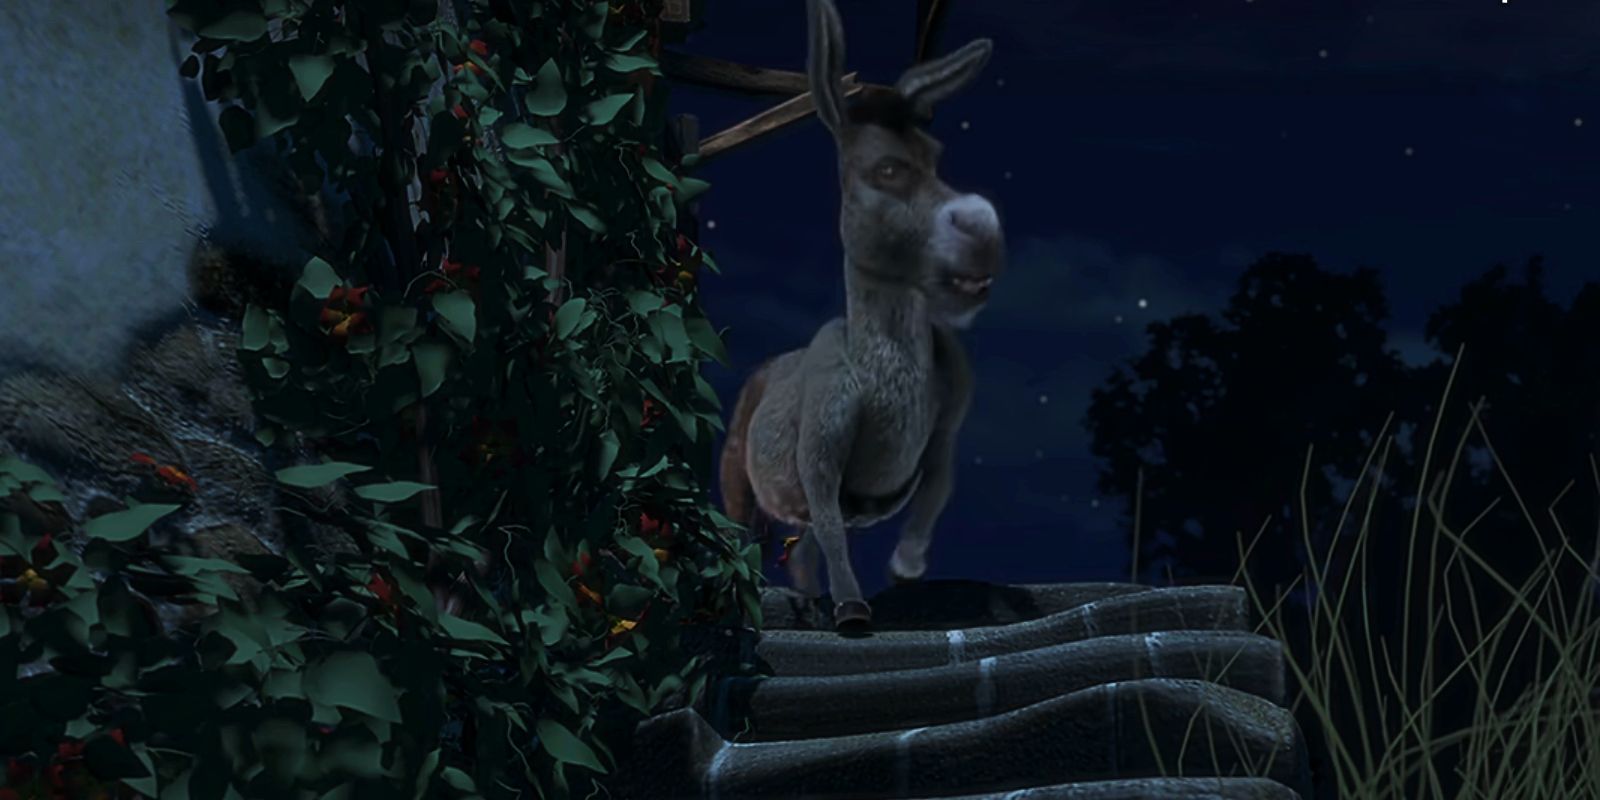 Donkey walks out the door and down the steps in Shrek